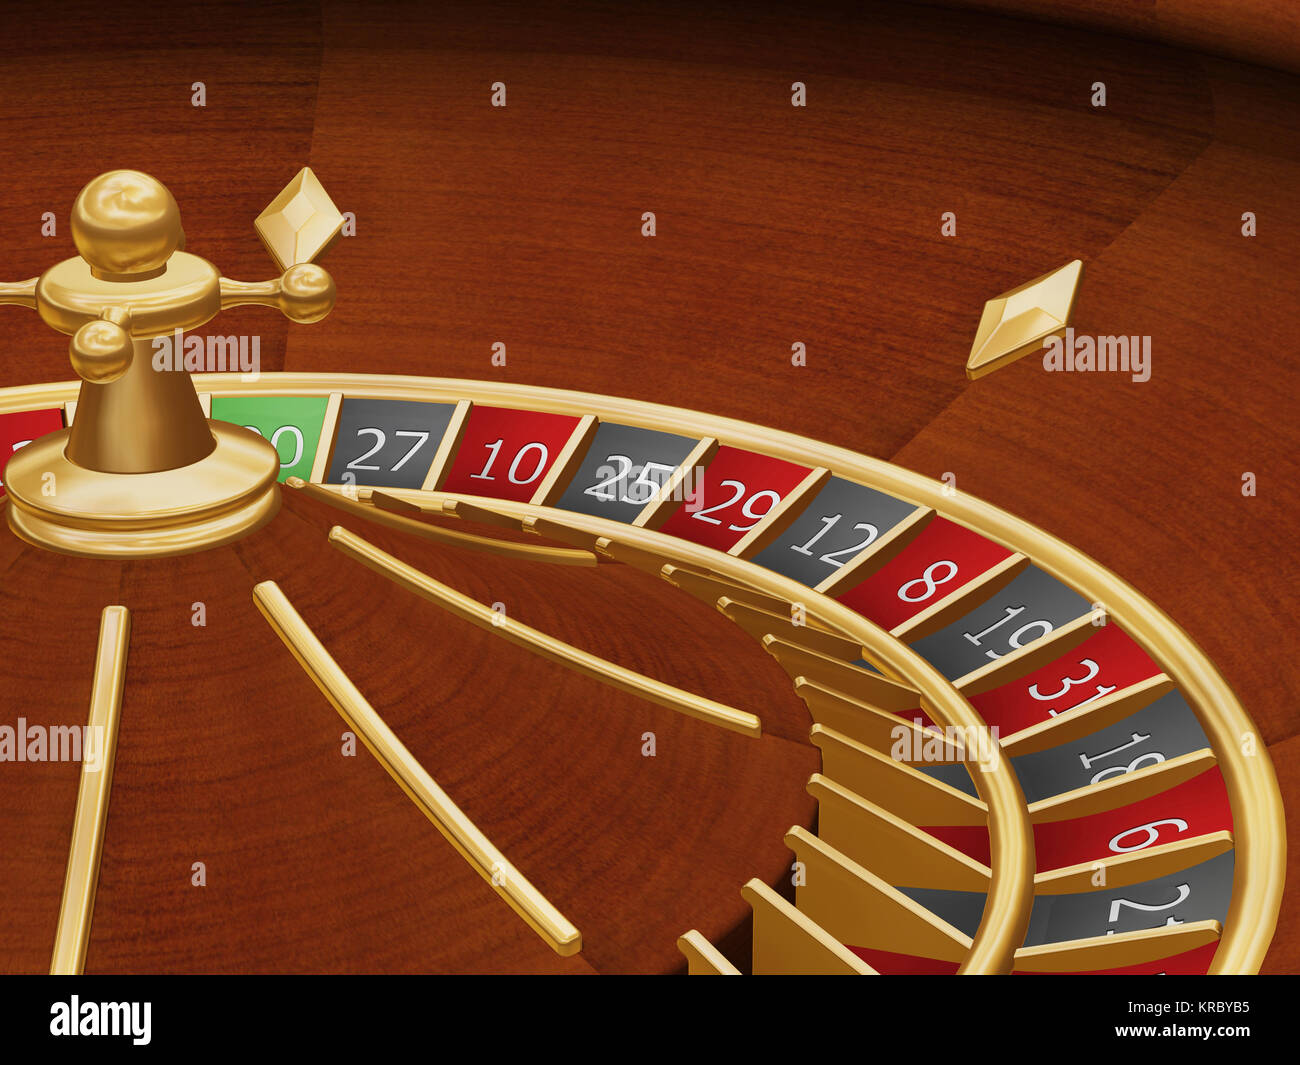 3D render of a roulette wheel Stock Photo